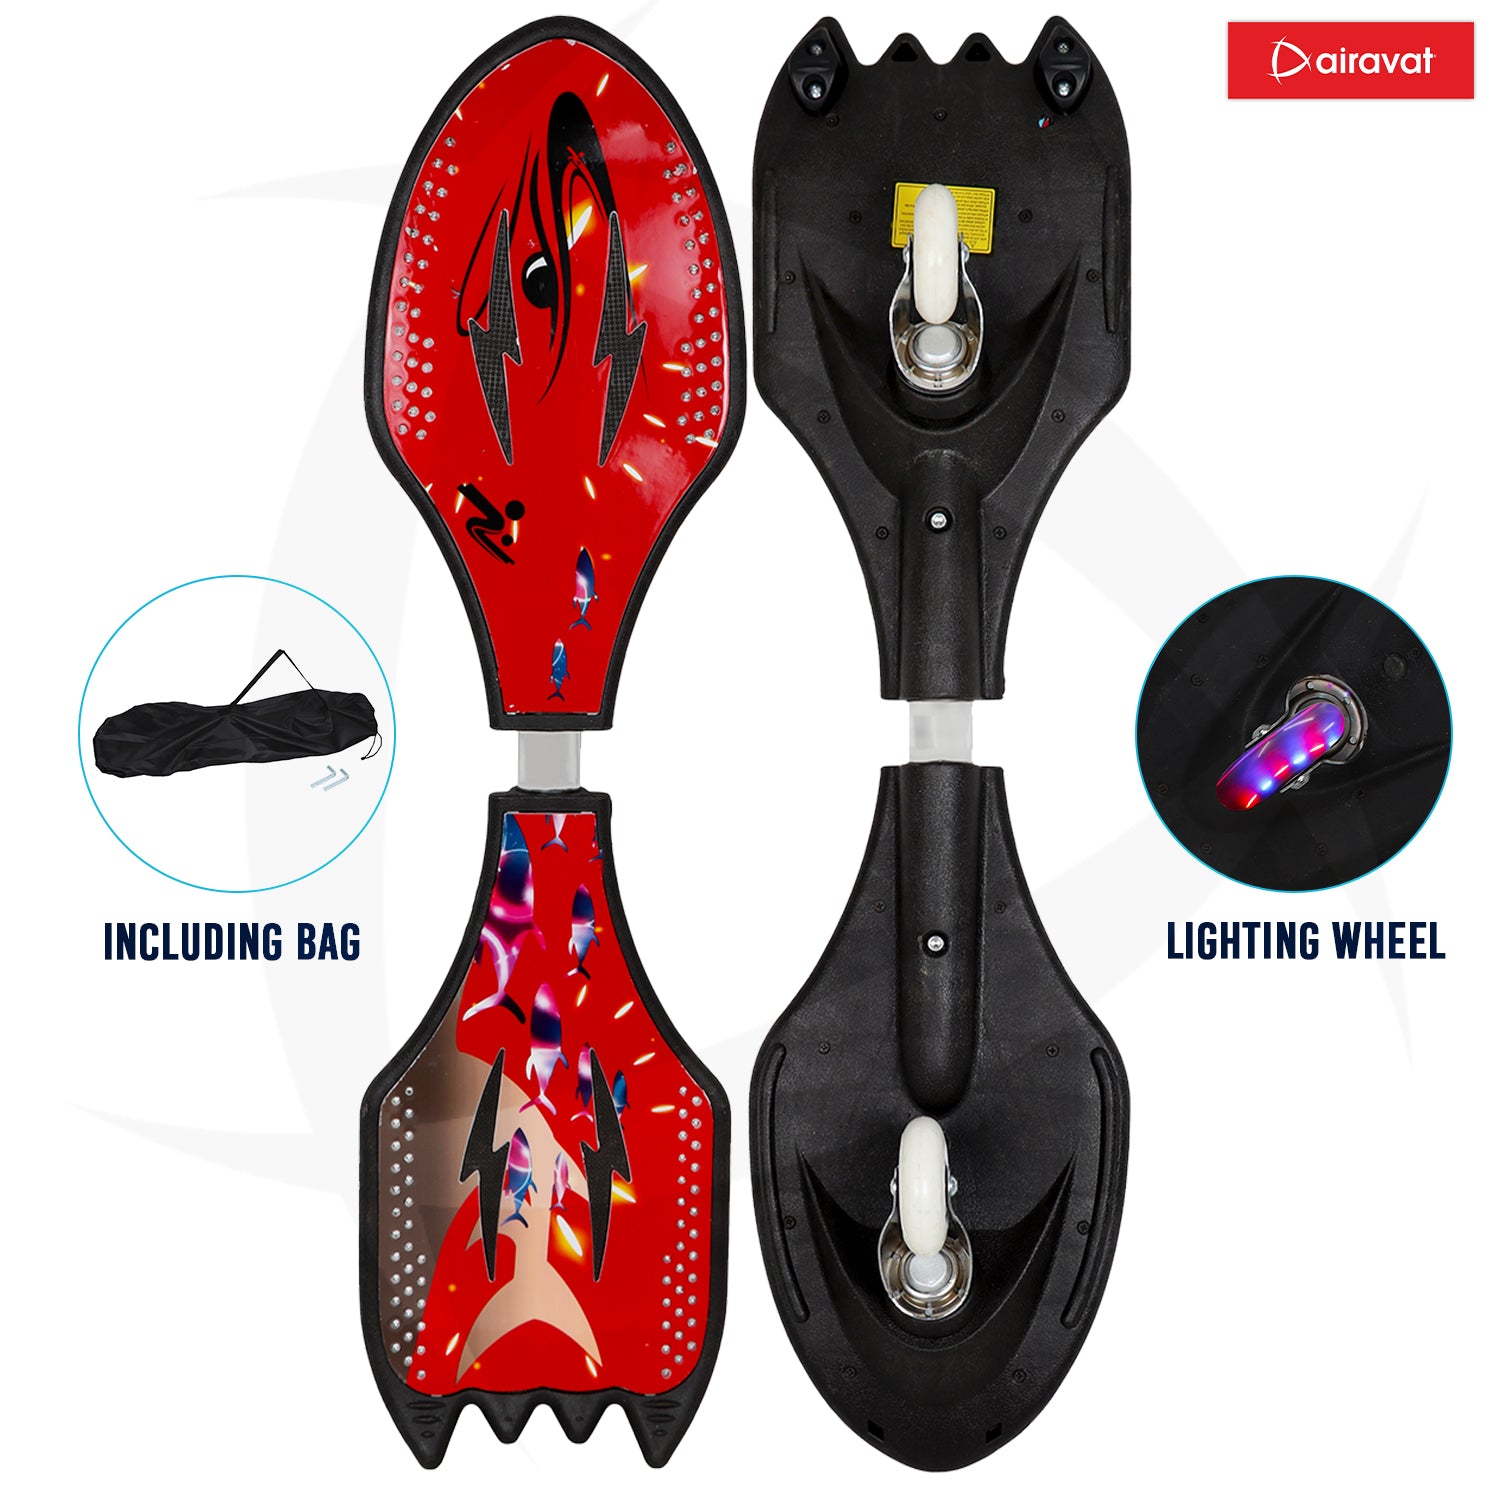 waveboard-7805-main-image-include-red